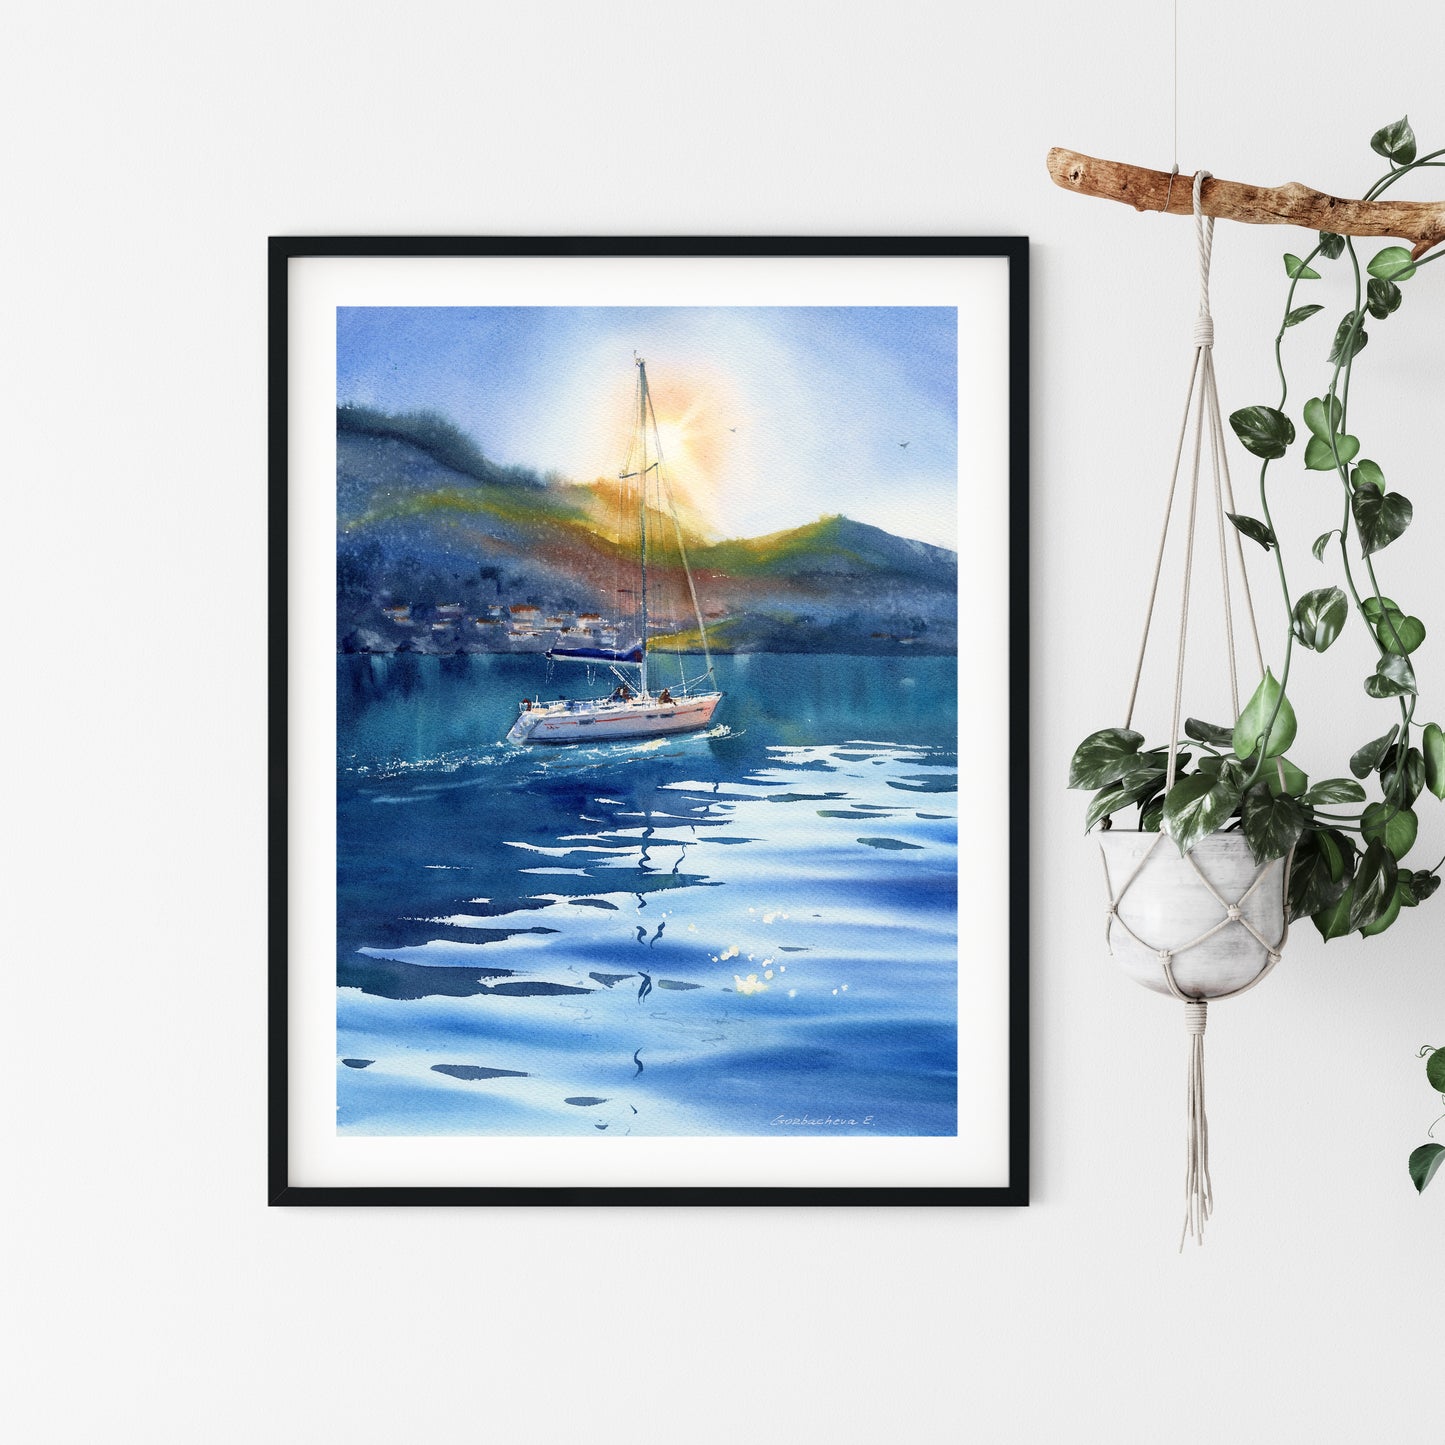 Yachting Painting Original Watercolor, Seascape Artwork - Yacht in the sun - 12x16 inch